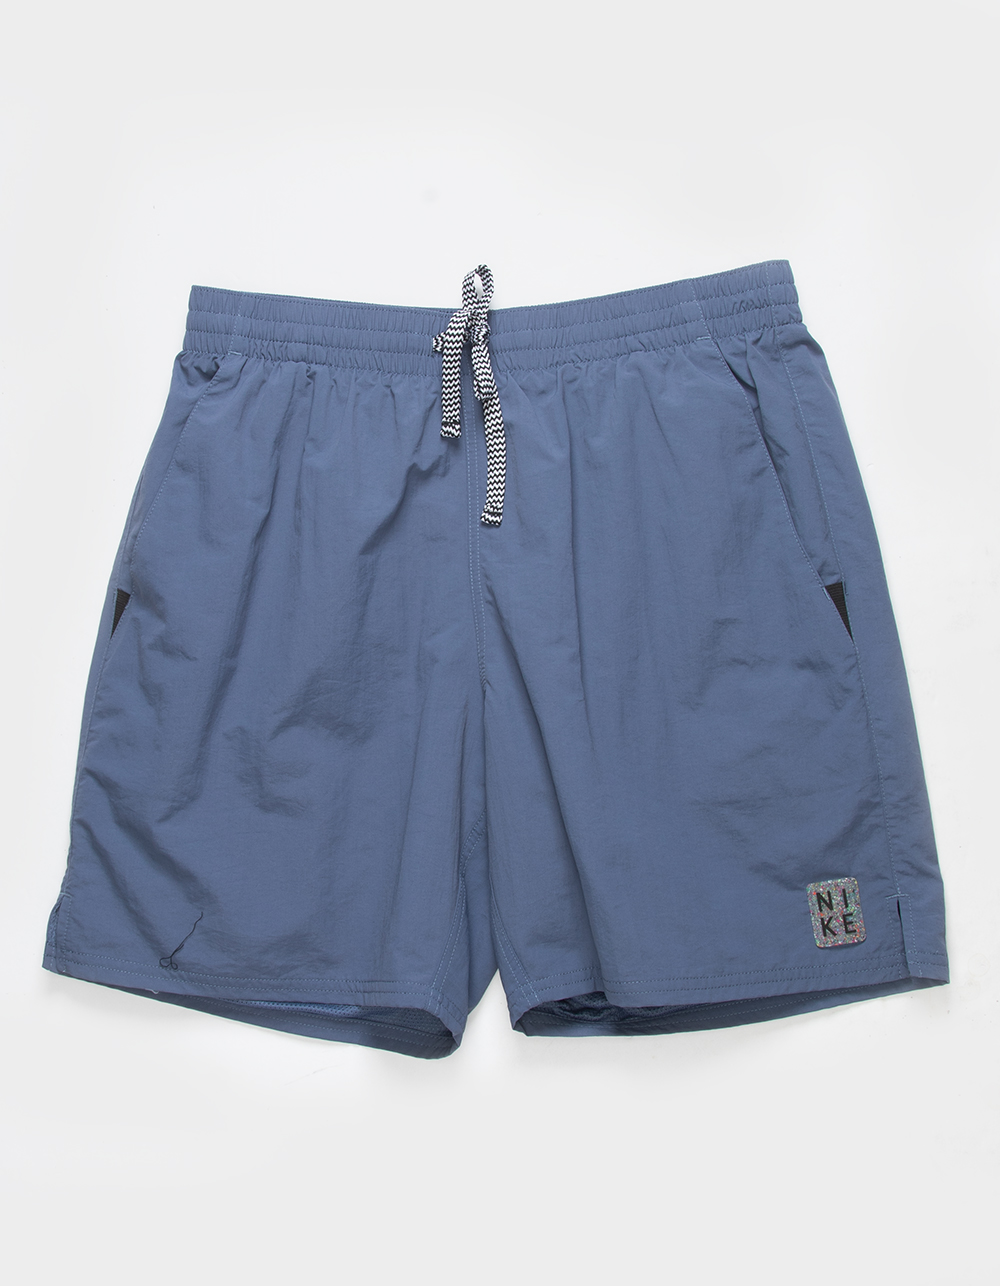 NIKE Icon Solid Mens Volley Swim Trunks - BLUE/GRAY | Tillys